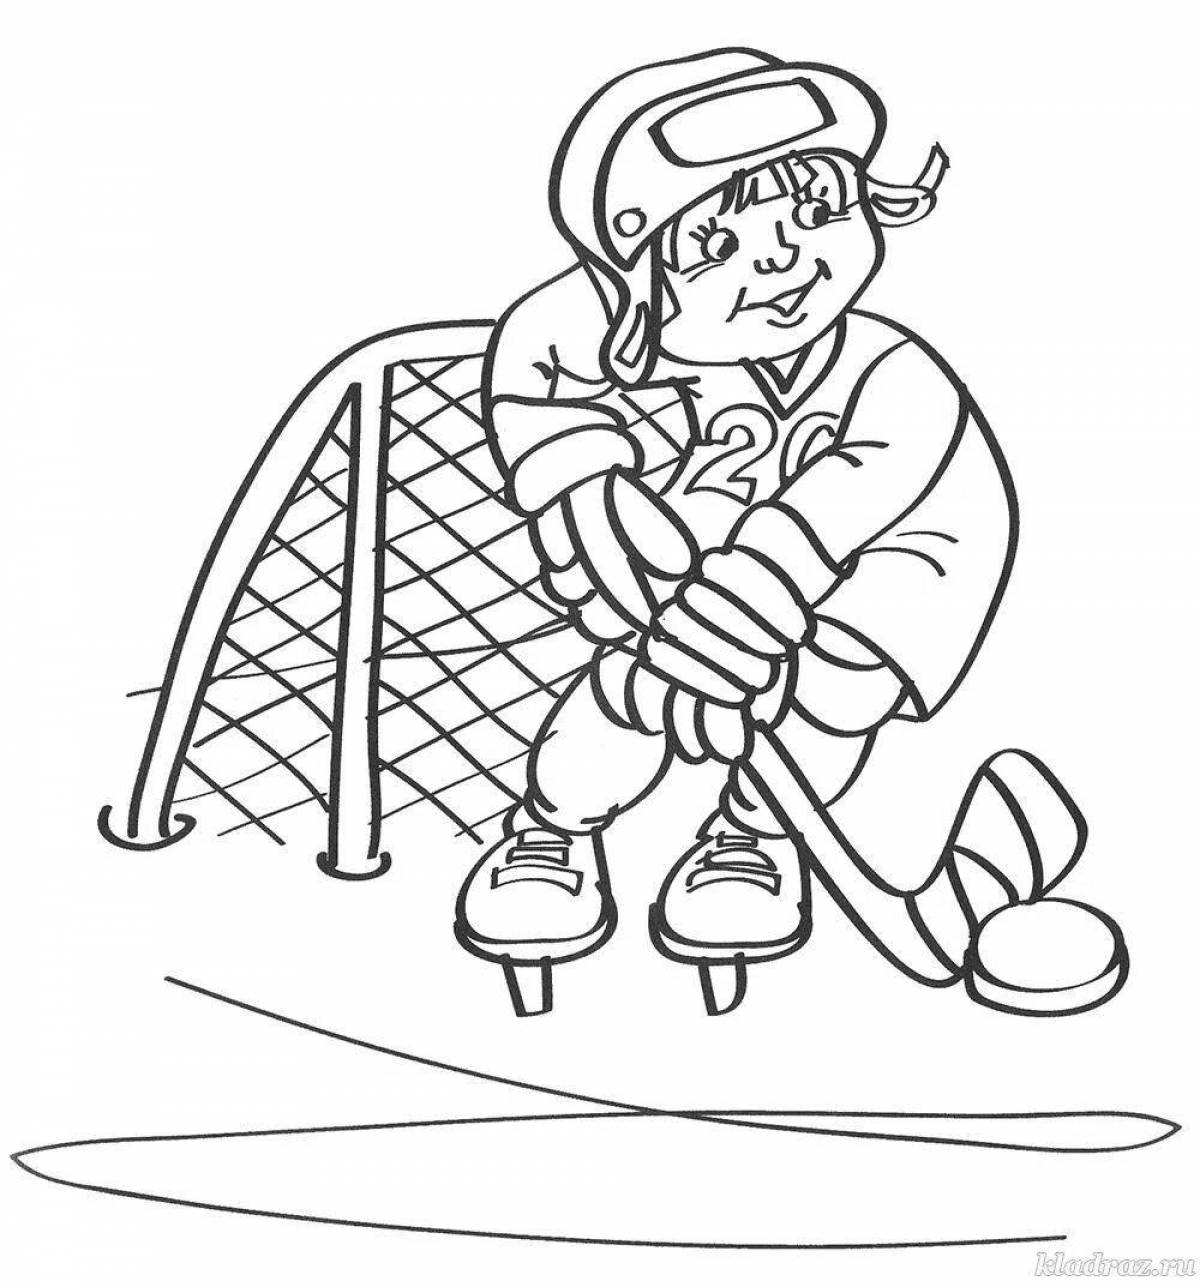 A fun winter sports coloring book for kids